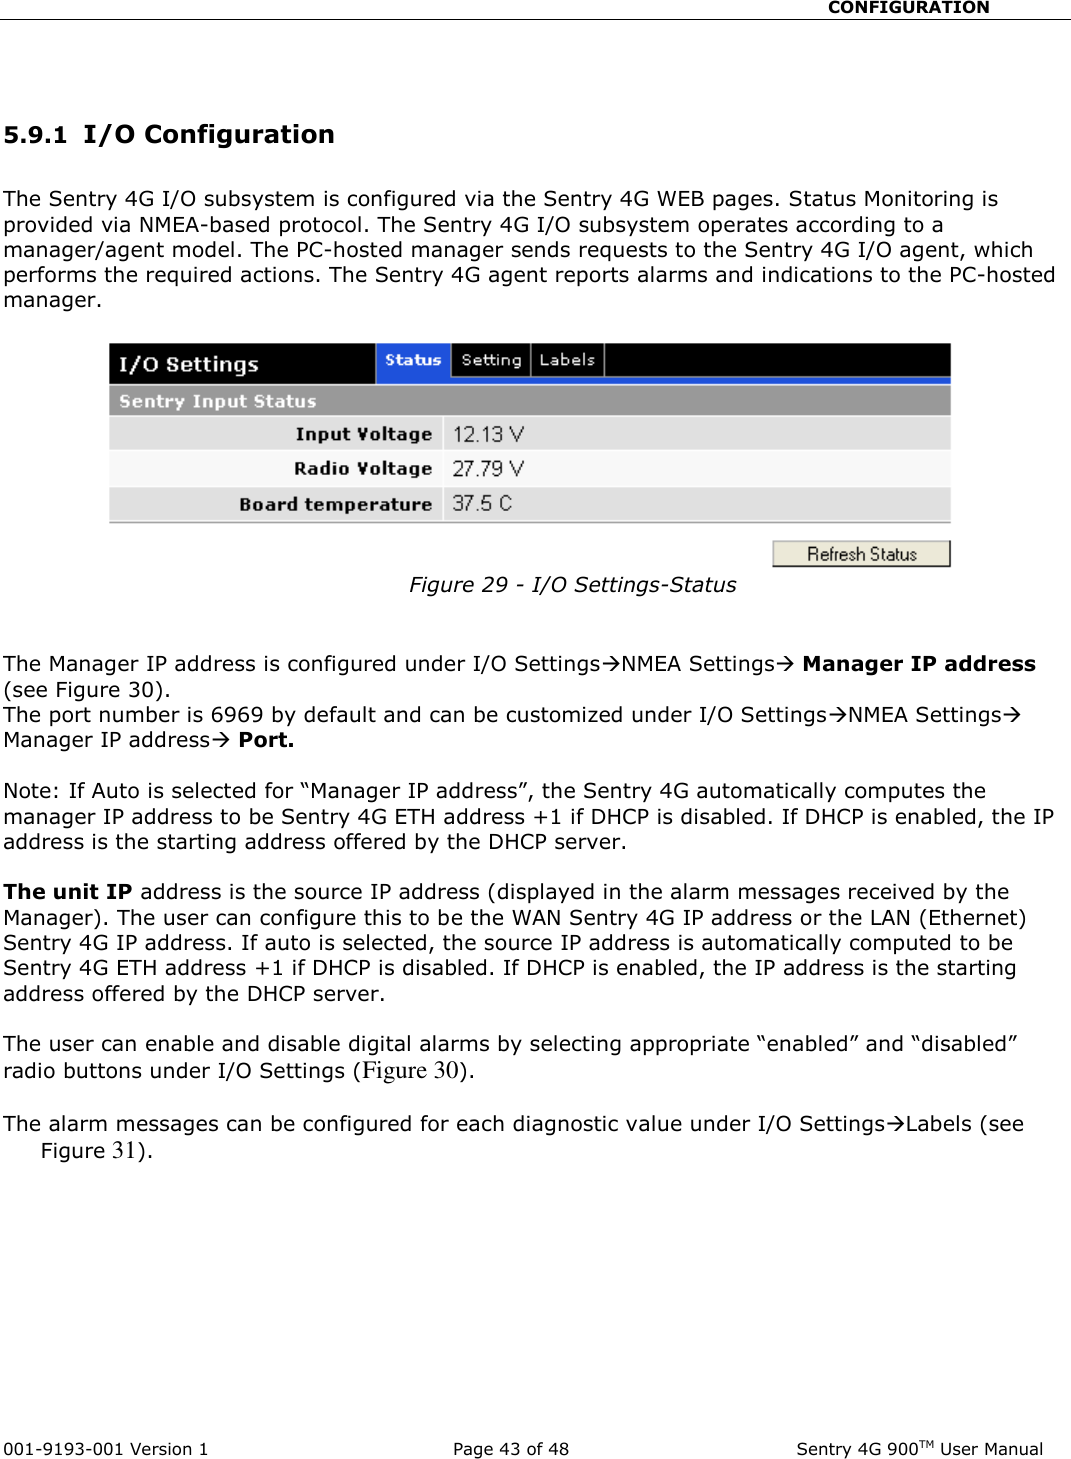                                                       CONFIGURATION  001-9193-001 Version 1              Page 43 of 48               Sentry 4G 900TM User Manual   5.9.1  I/O Configuration  The Sentry 4G I/O subsystem is configured via the Sentry 4G WEB pages. Status Monitoring is provided via NMEA-based protocol. The Sentry 4G I/O subsystem operates according to a manager/agent model. The PC-hosted manager sends requests to the Sentry 4G I/O agent, which performs the required actions. The Sentry 4G agent reports alarms and indications to the PC-hosted manager.  Figure 29 - I/O Settings-Status   The Manager IP address is configured under I/O SettingsNMEA Settings Manager IP address (see Figure 30).  The port number is 6969 by default and can be customized under I/O SettingsNMEA Settings Manager IP address Port.  Note: If Auto is selected for “Manager IP address”, the Sentry 4G automatically computes the manager IP address to be Sentry 4G ETH address +1 if DHCP is disabled. If DHCP is enabled, the IP address is the starting address offered by the DHCP server.   The unit IP address is the source IP address (displayed in the alarm messages received by the Manager). The user can configure this to be the WAN Sentry 4G IP address or the LAN (Ethernet) Sentry 4G IP address. If auto is selected, the source IP address is automatically computed to be Sentry 4G ETH address +1 if DHCP is disabled. If DHCP is enabled, the IP address is the starting address offered by the DHCP server.  The user can enable and disable digital alarms by selecting appropriate “enabled” and “disabled” radio buttons under I/O Settings (Figure 30).  The alarm messages can be configured for each diagnostic value under I/O SettingsLabels (see   Figure 31). 